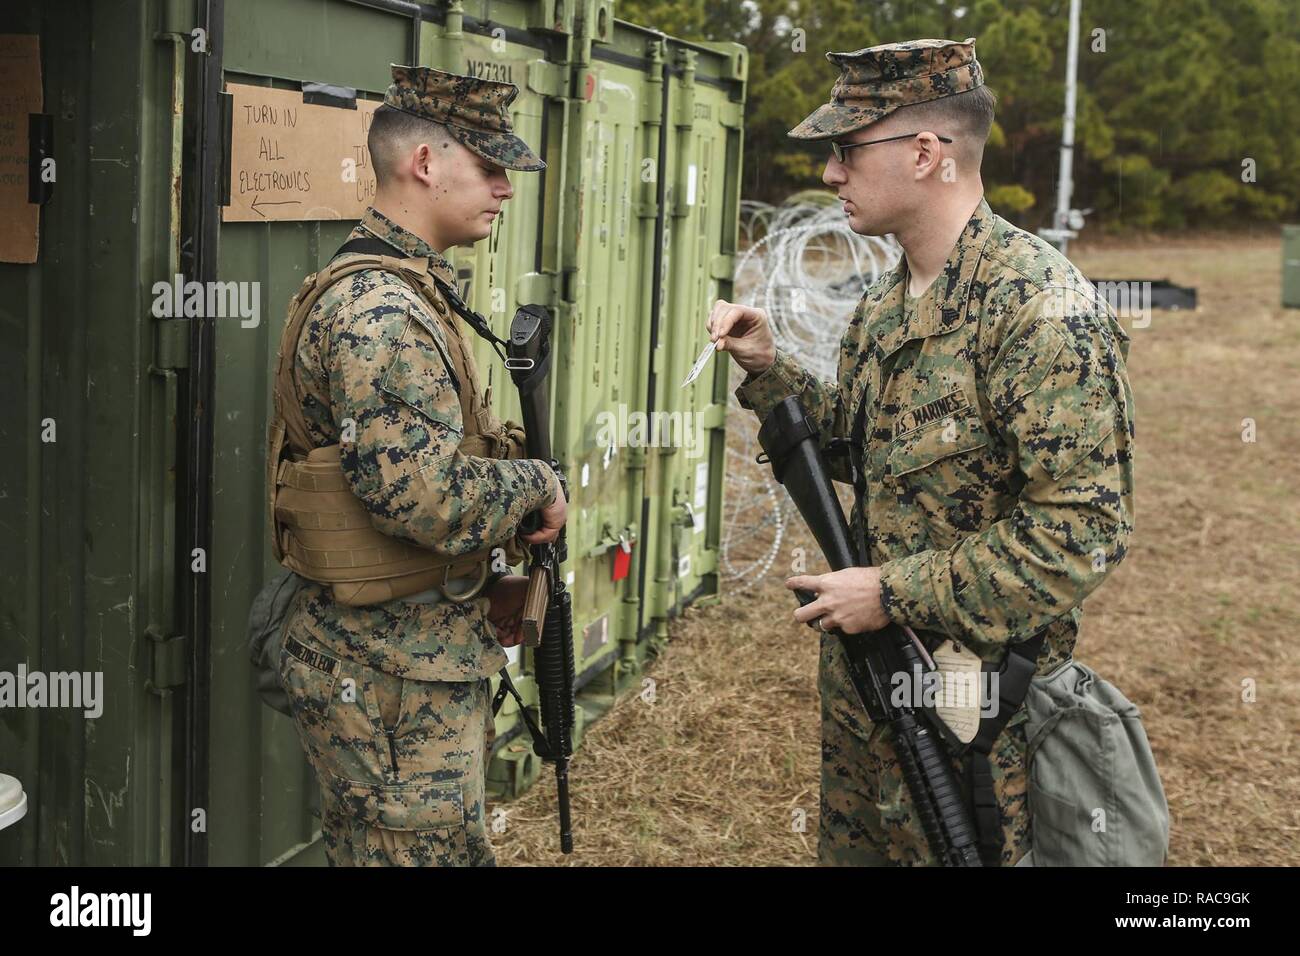 U. S. Marine Corps Lance Cpl. Yosef A. Charriez-Deleleon, left, Embarkation Specialist, Service Company, Combat Logistics Regiment (CLR) 2, 2nd Marine Logistics Group, inspects a Marines Common Access Card while standing duty during a command post exercise (CPX) at Landing Zone Canary on Camp Lejeune, N.C., Jan. 18, 2016. CLR-2 conducted the CPX in preparation for an upcoming deployment. Stock Photo